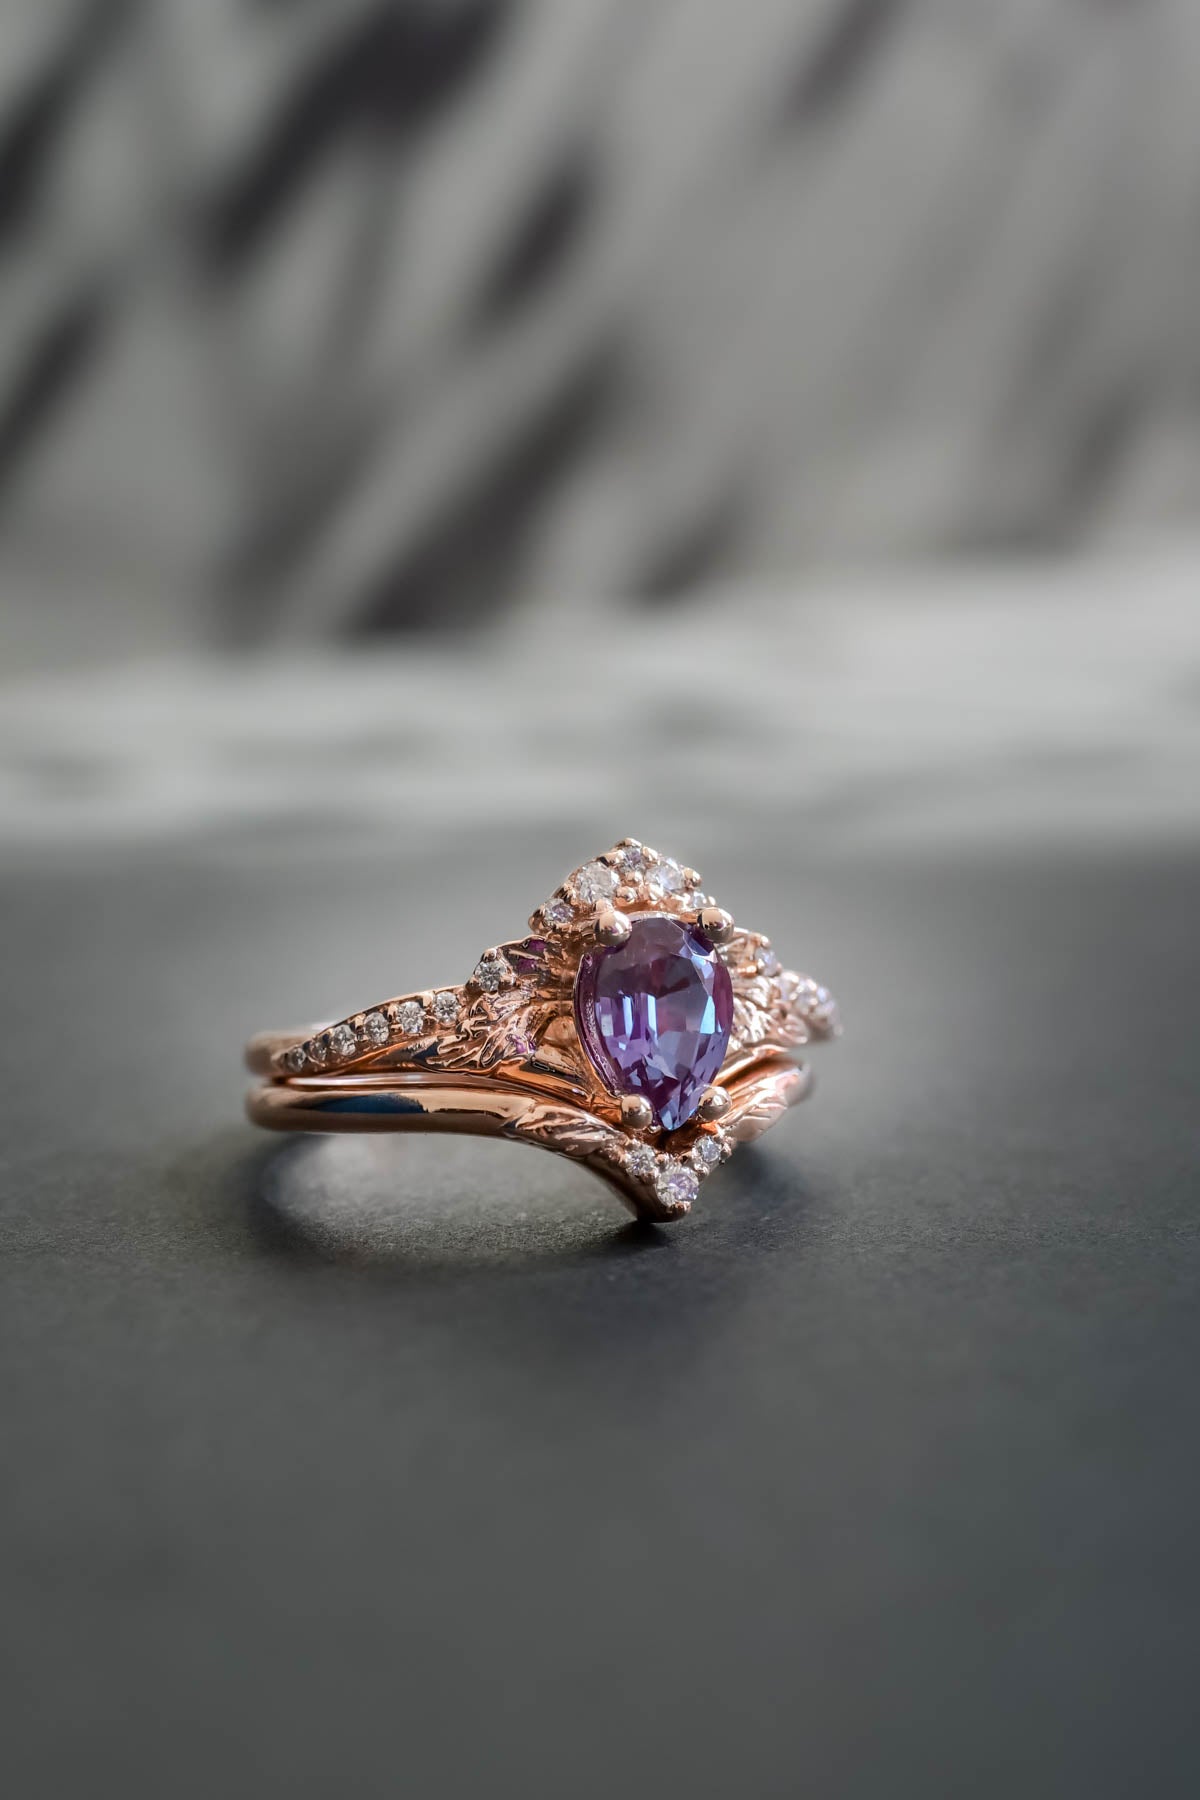 READY TO SHIP: Amelia set in 14K rose gold, pear alexandrite 7x5 mm, moissanites, RING SIZE - 5 US - Eden Garden Jewelry™